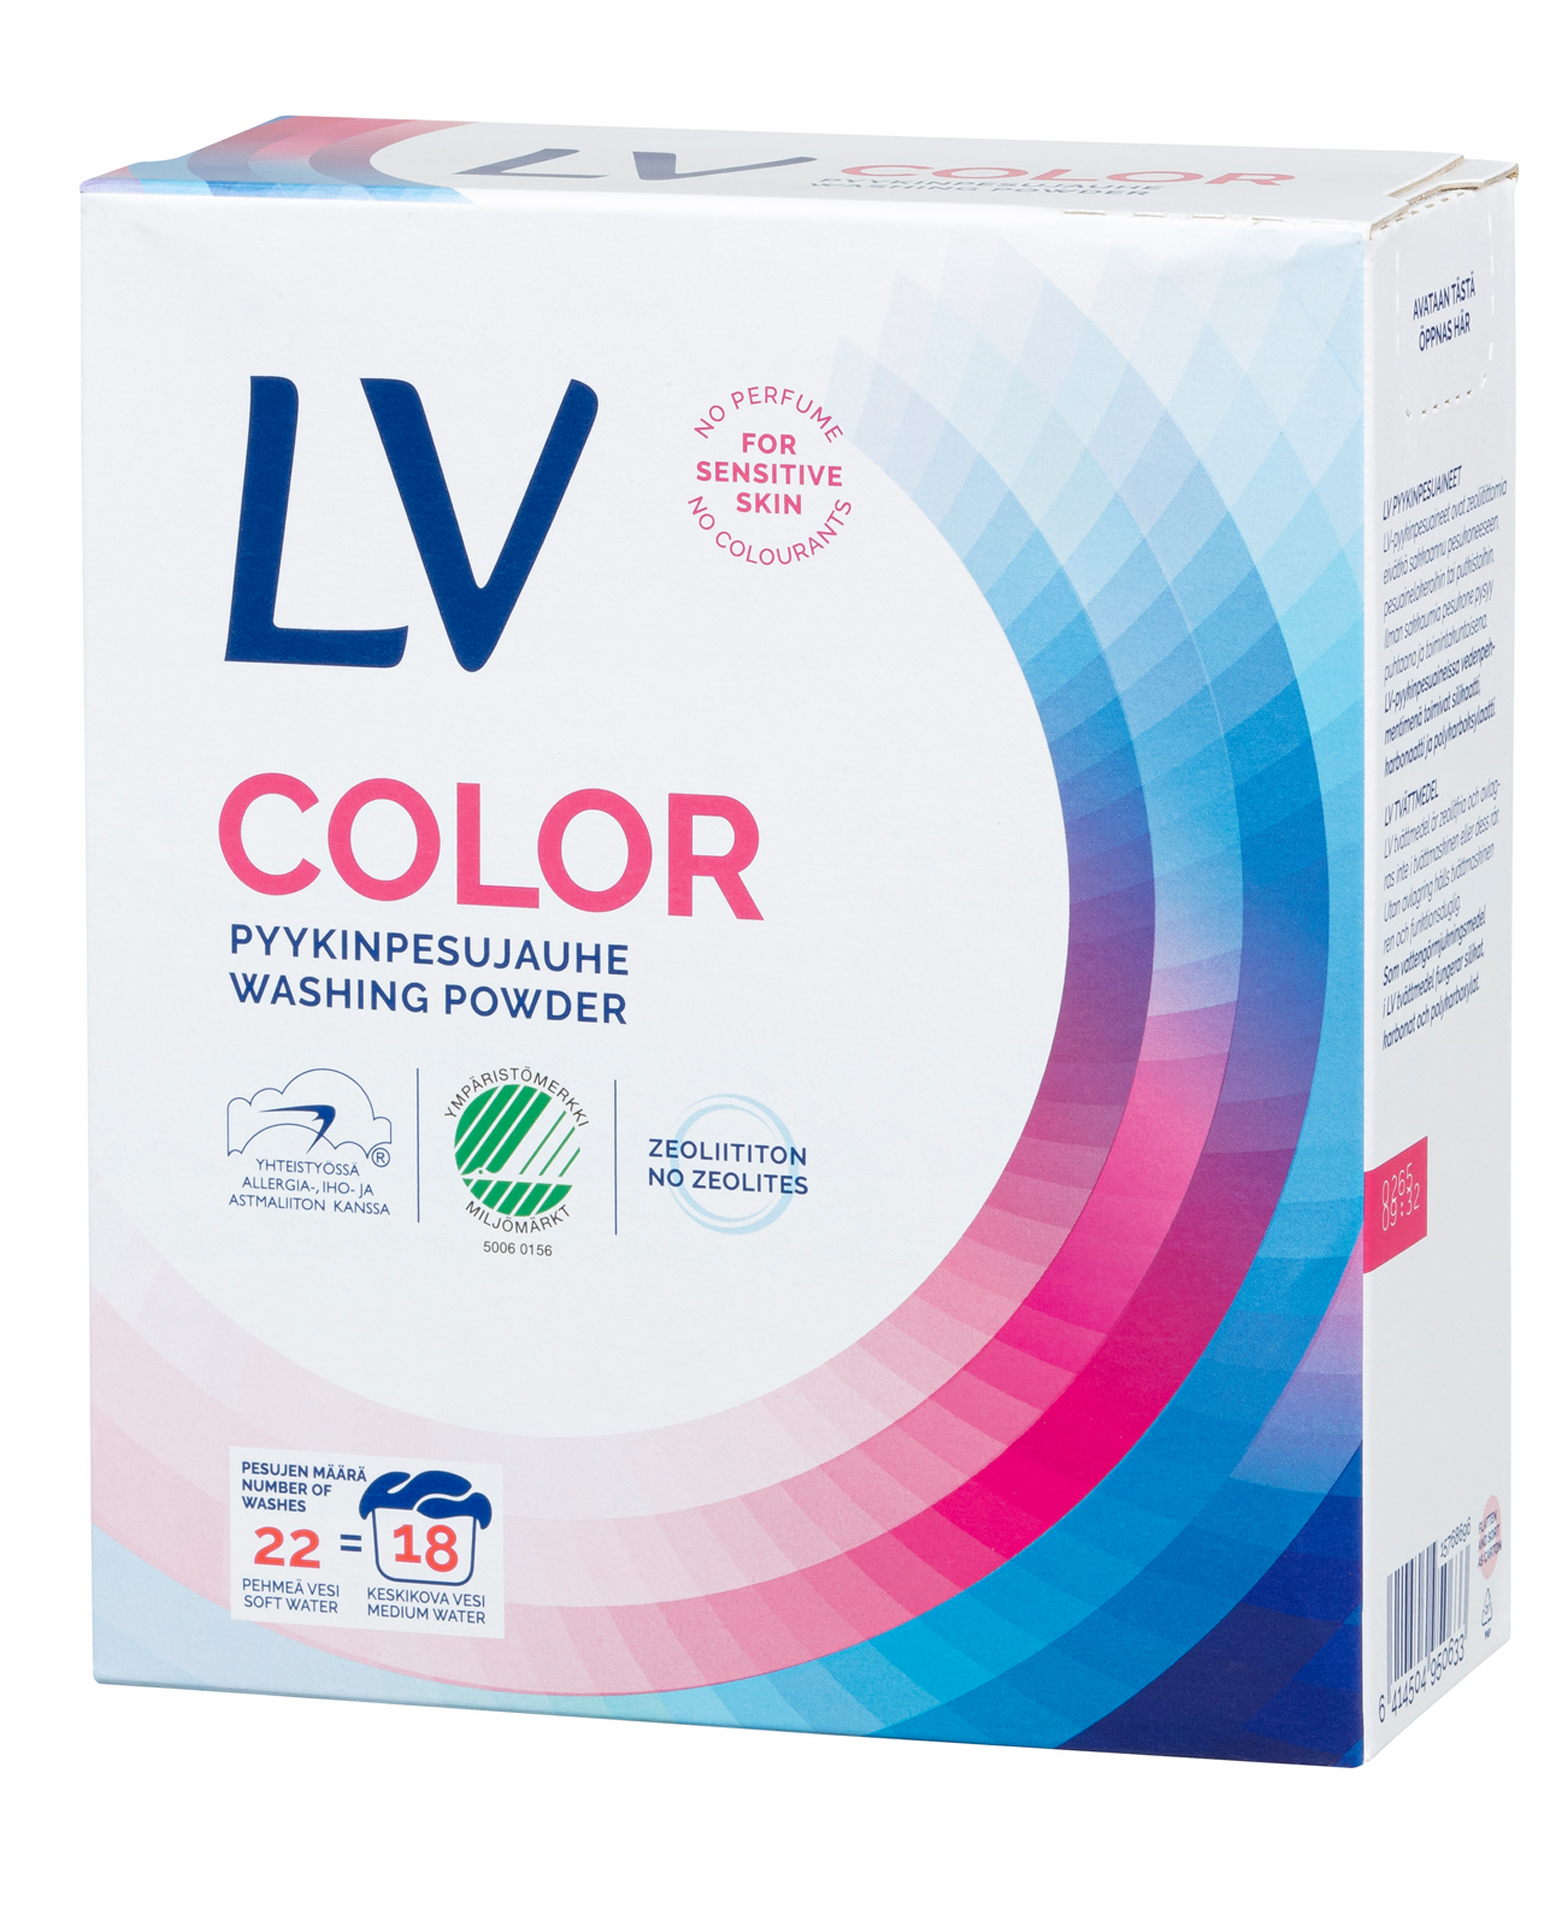 LV 750g Color washing powder concentrate, 22 washes